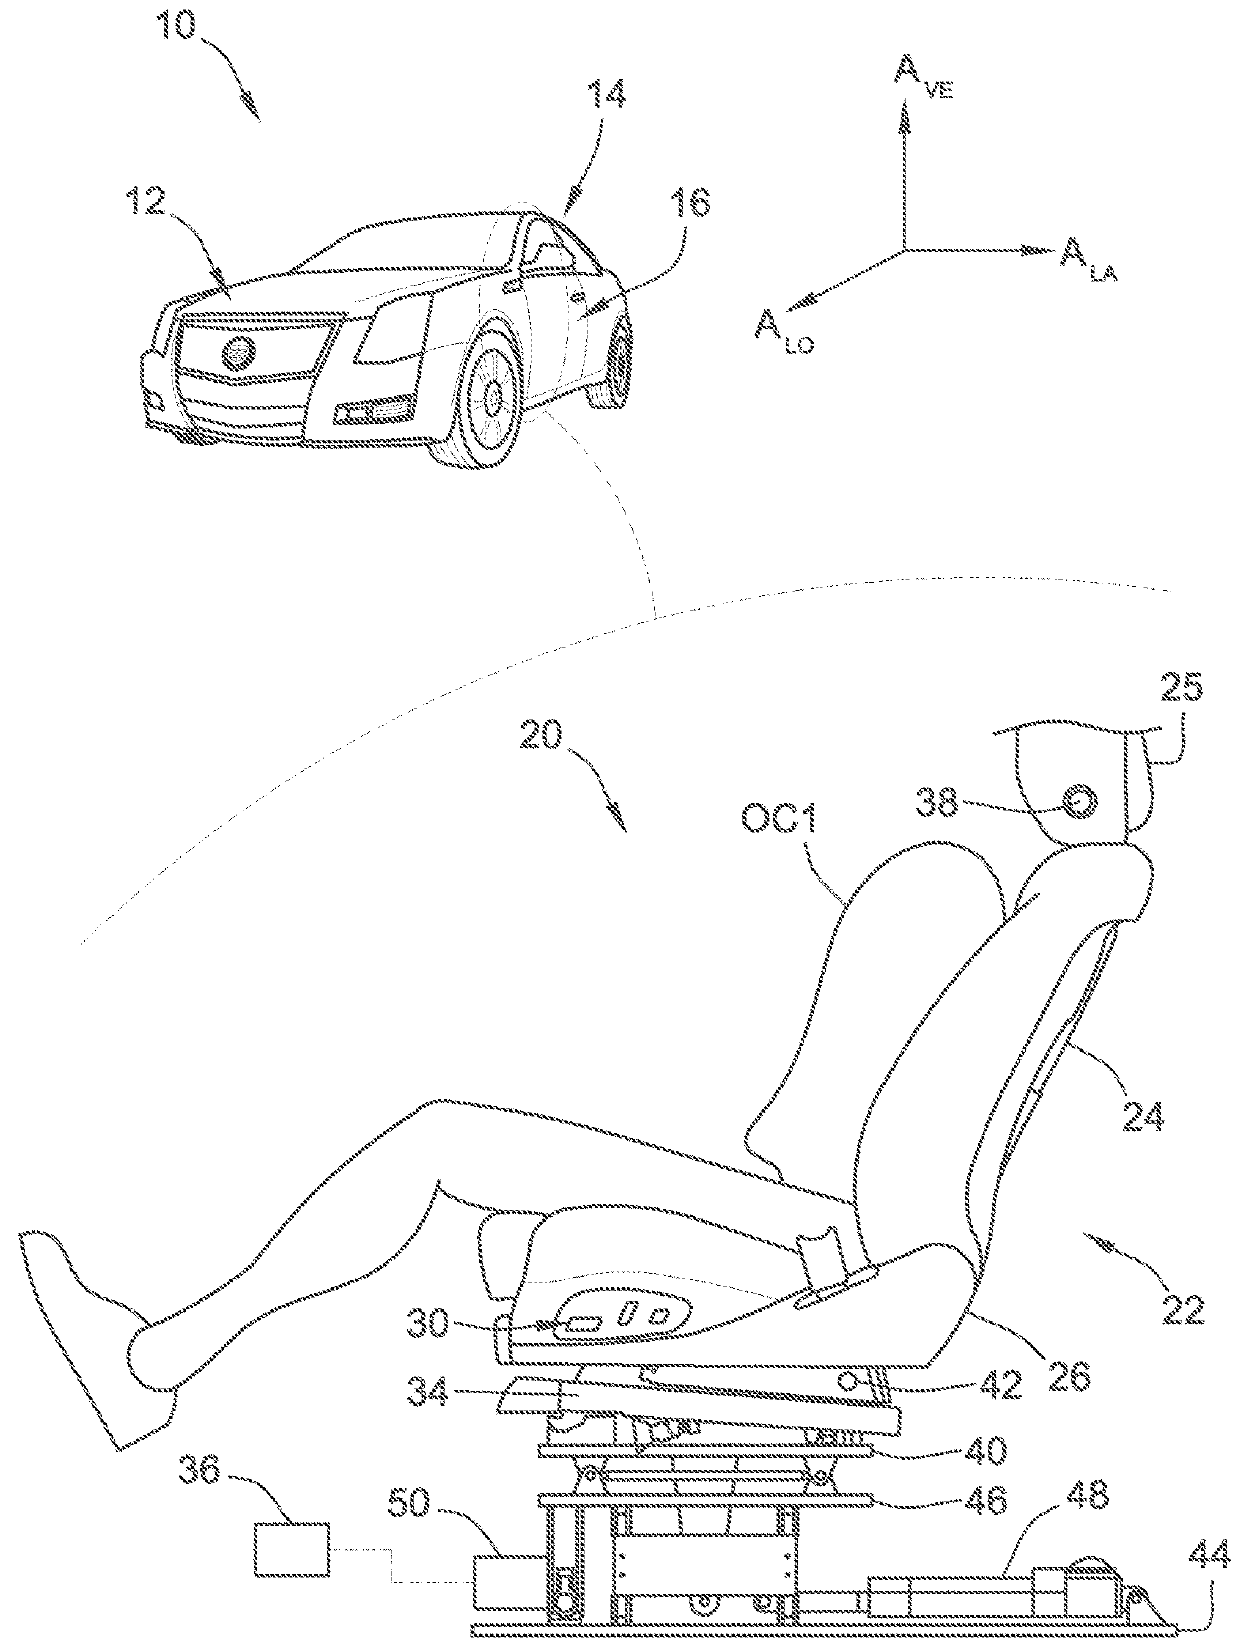 Active vehicle seat architecture for inertial compensation in motor vehicles